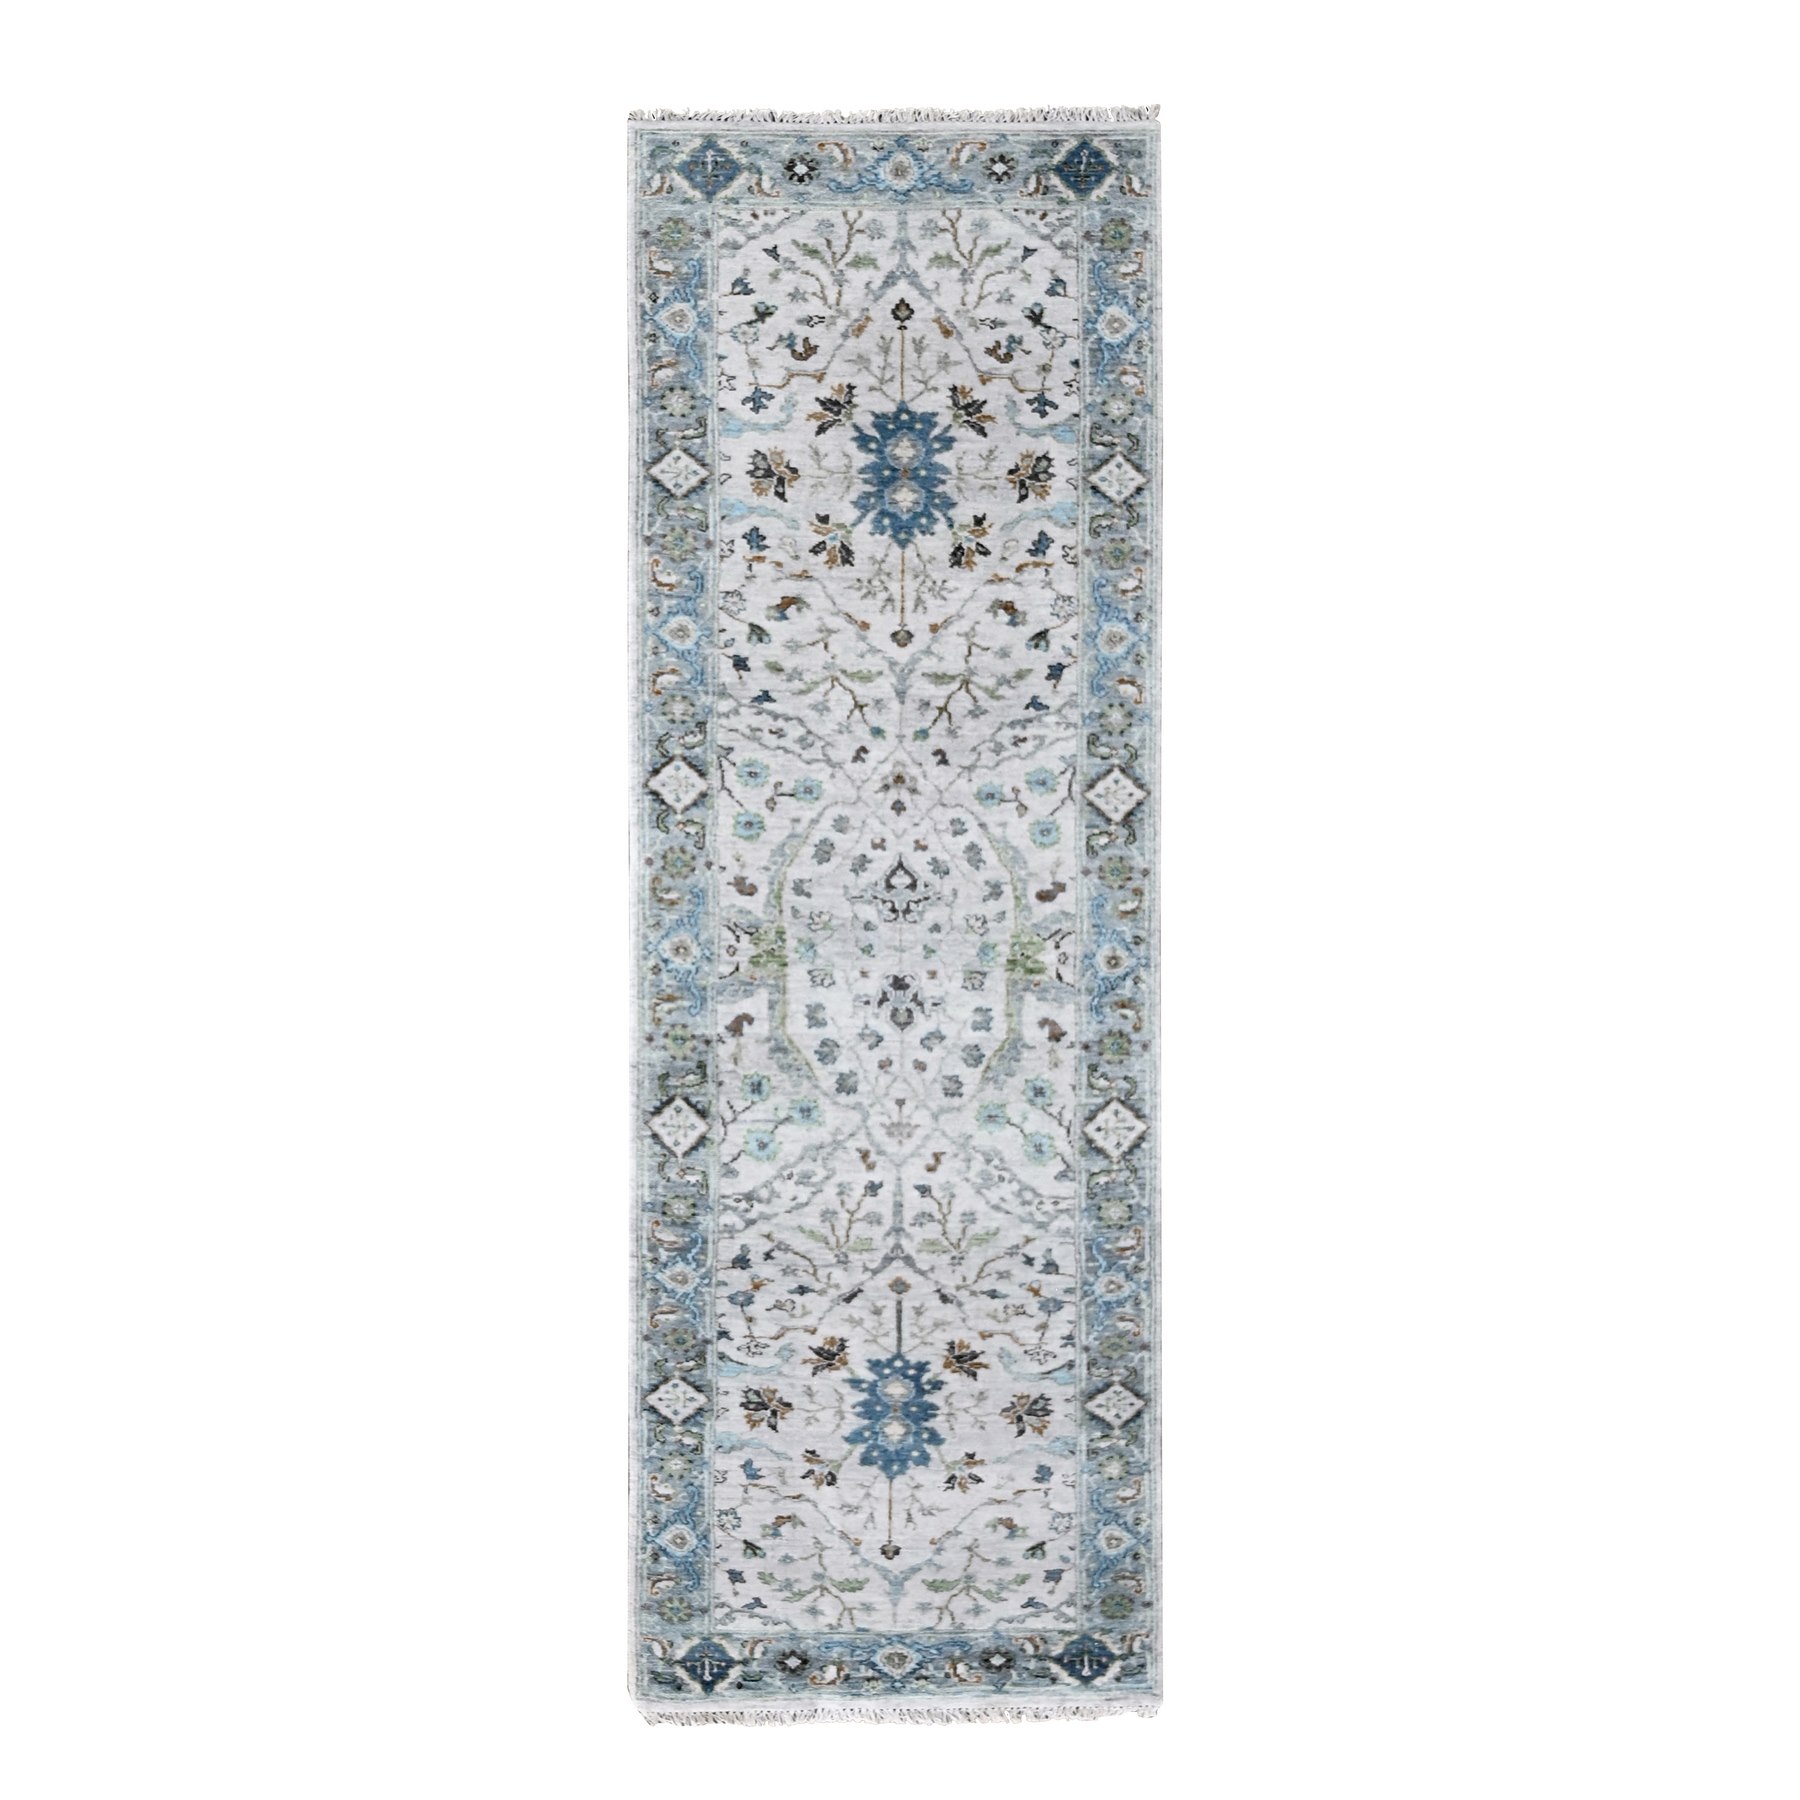 Miller Mood Gray, Velvety and Soft Wool, Densely Woven, Hand Knotted, Floral Motifs Oushak Design Oriental Runner Rug